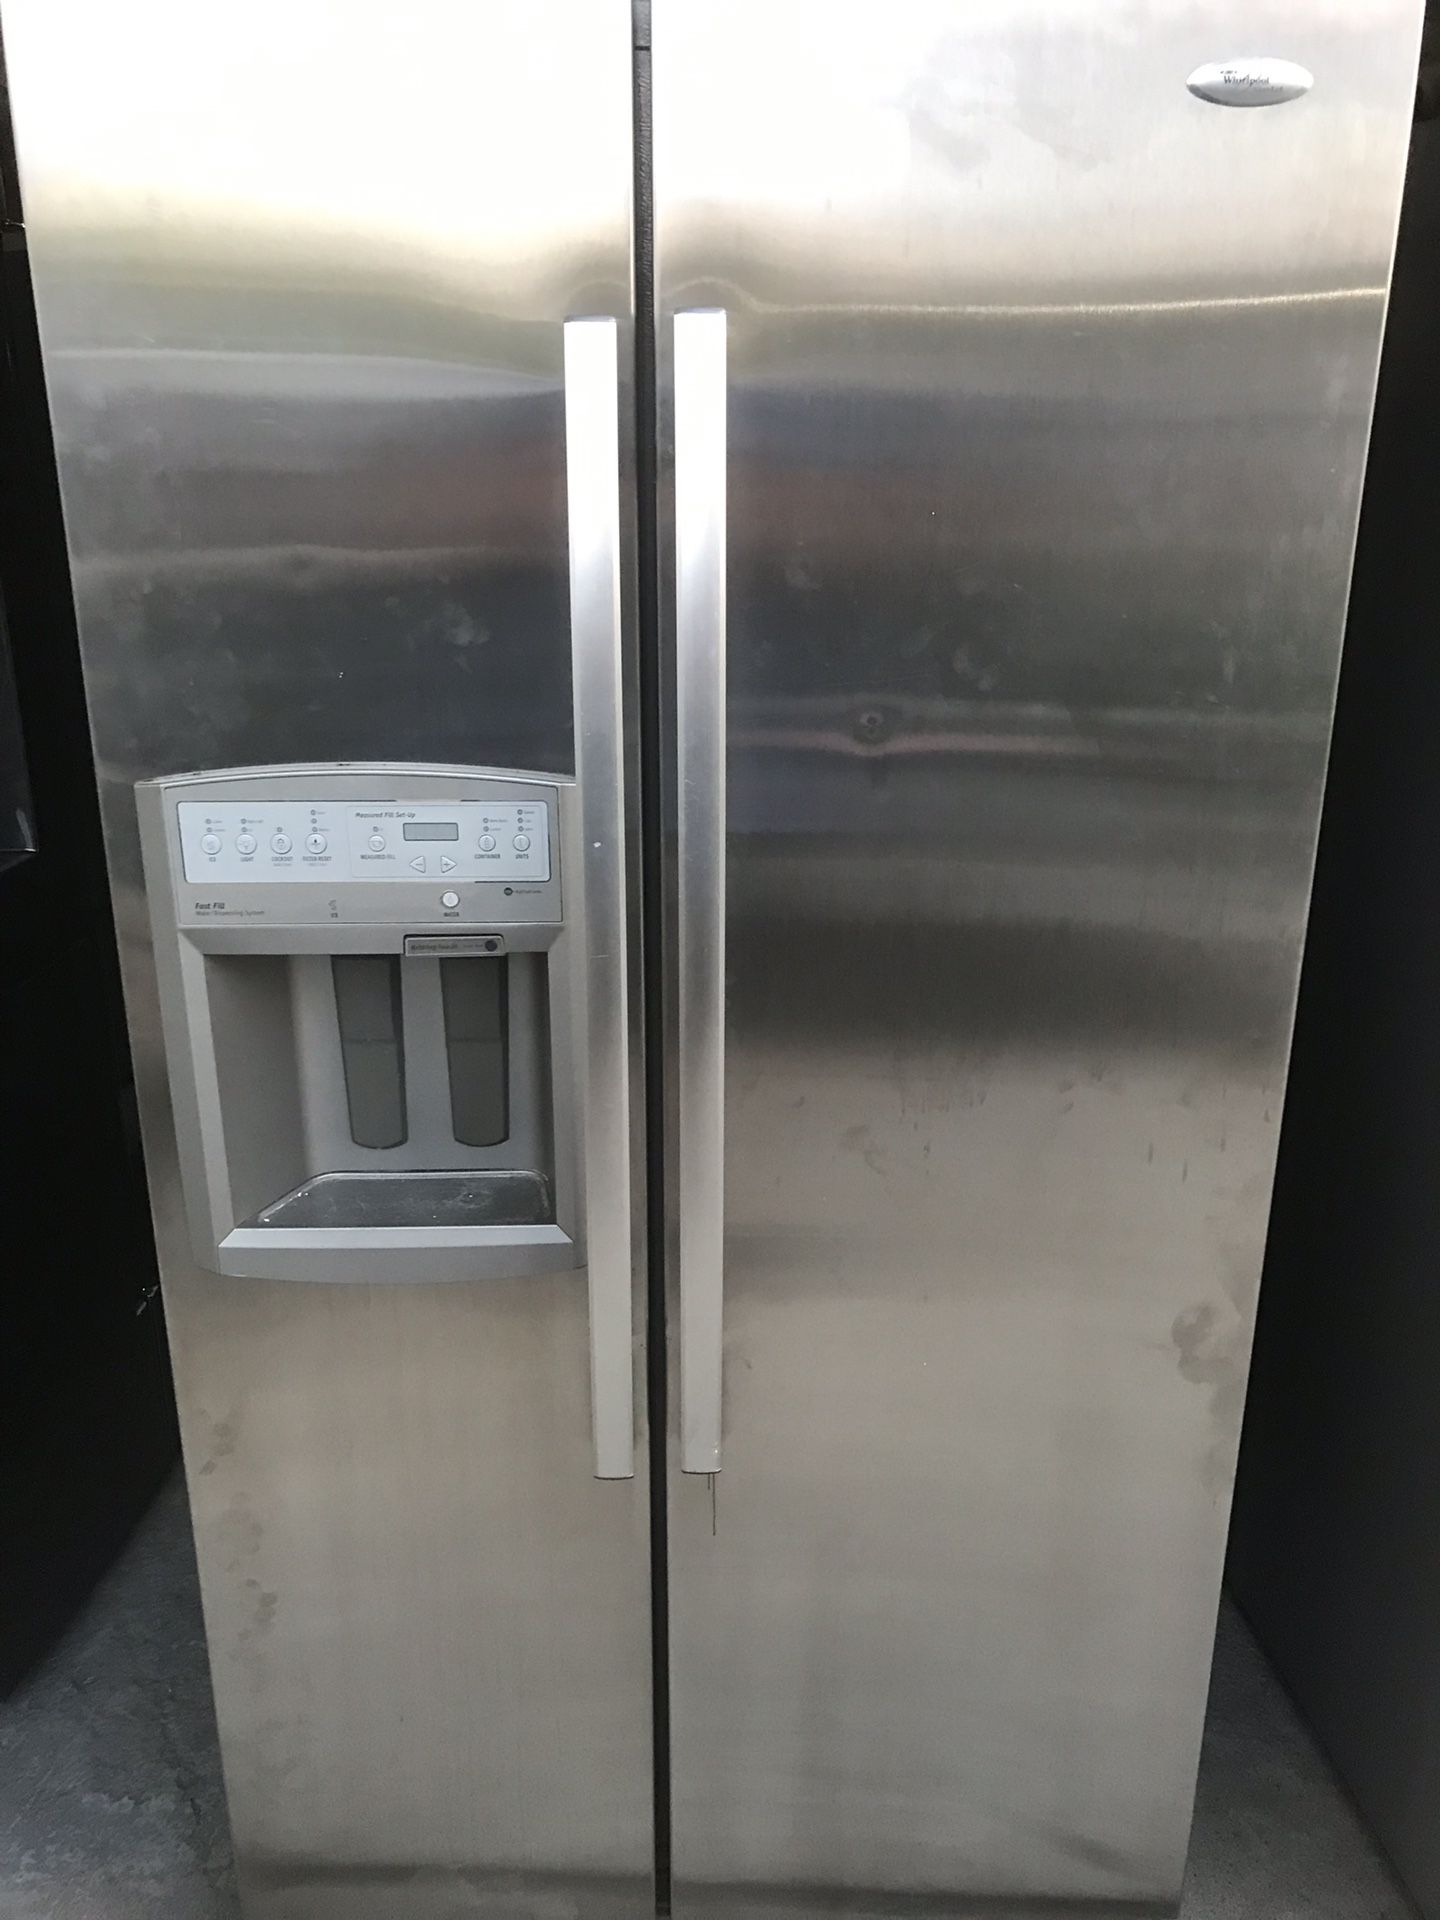 Whirlpool stainless Double door refrigerator with ice maker $300